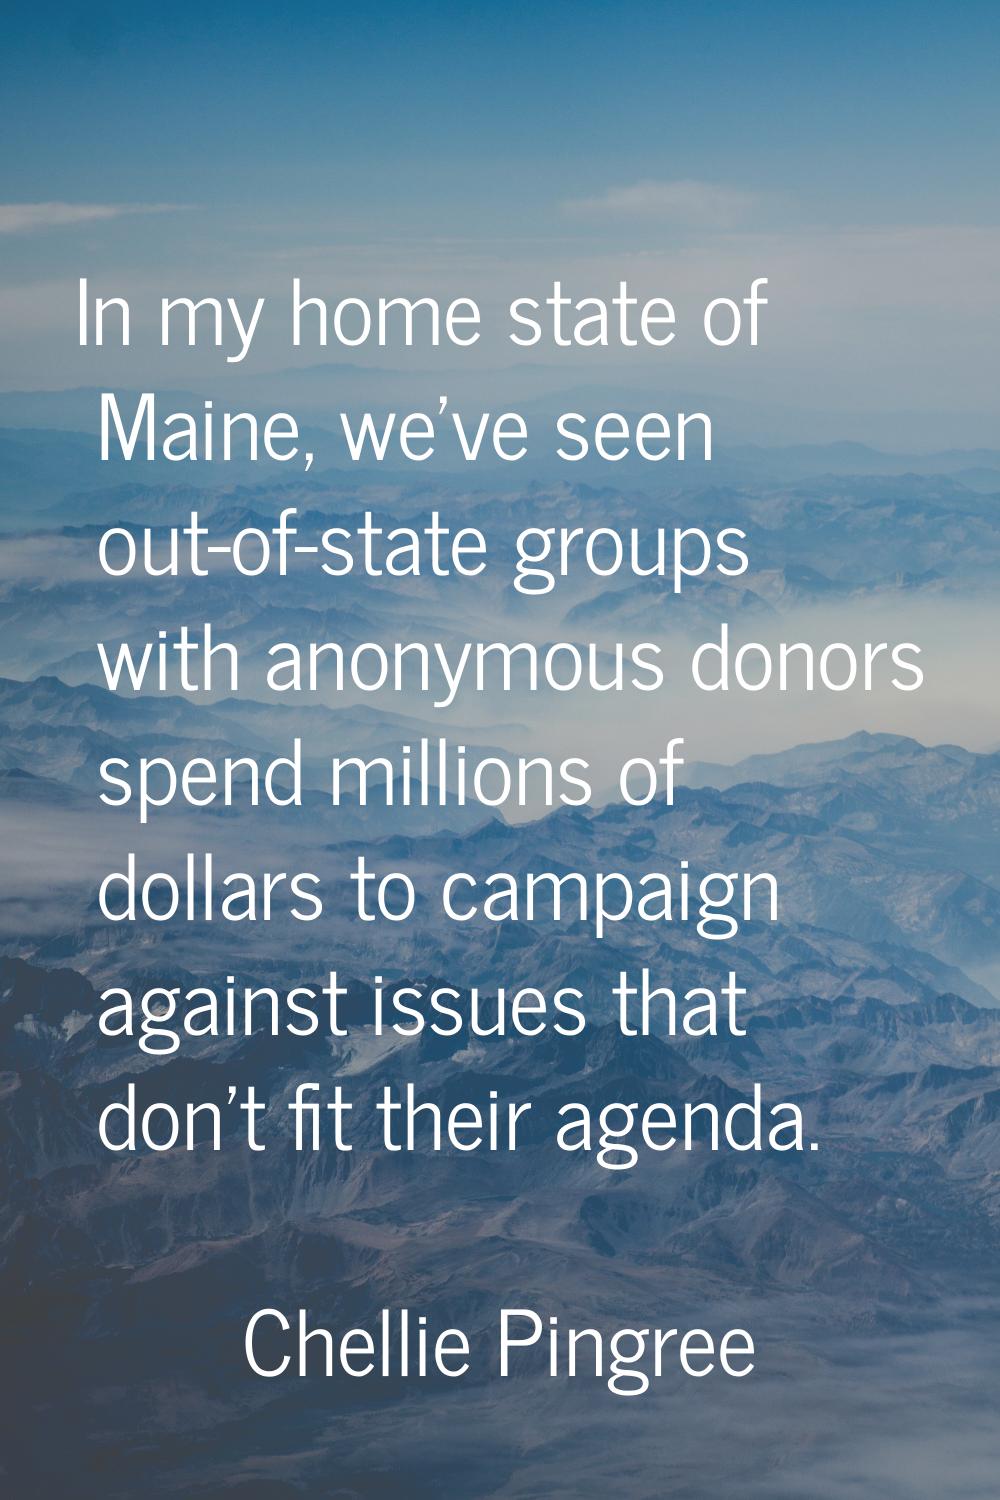 In my home state of Maine, we've seen out-of-state groups with anonymous donors spend millions of d